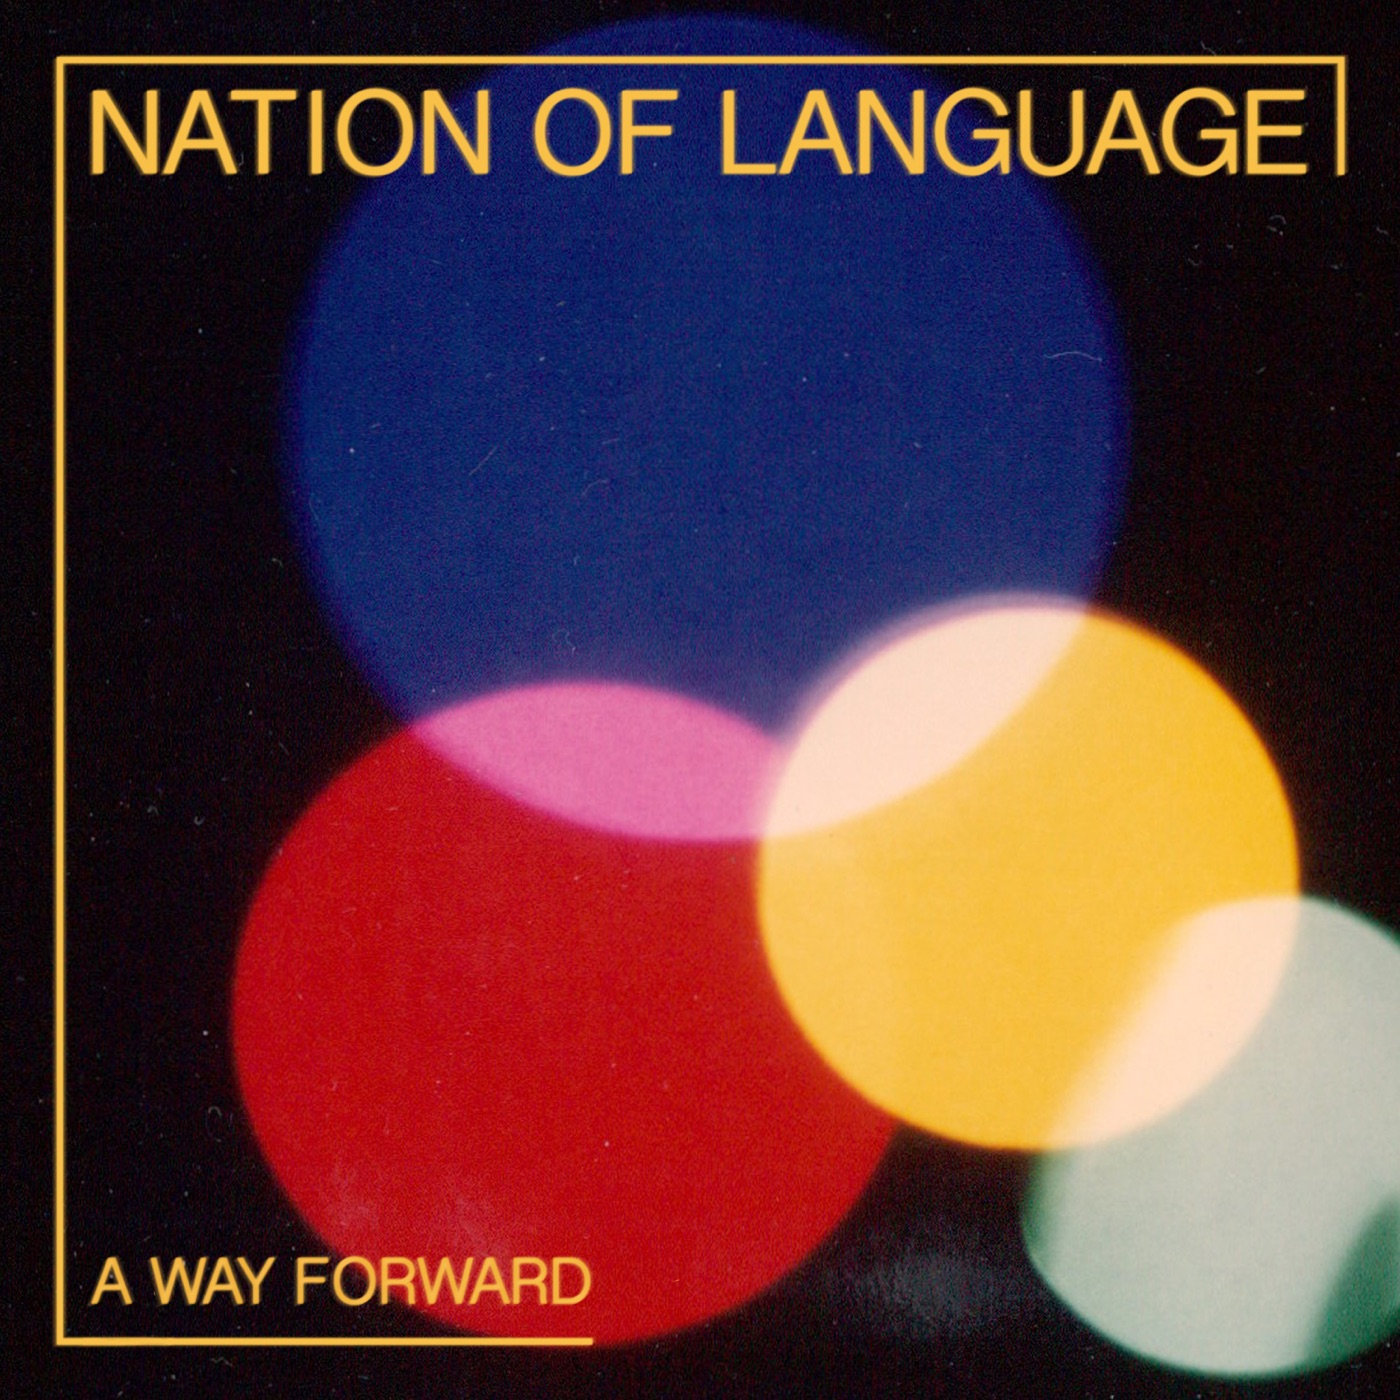 A Way Forward by Nation of Language